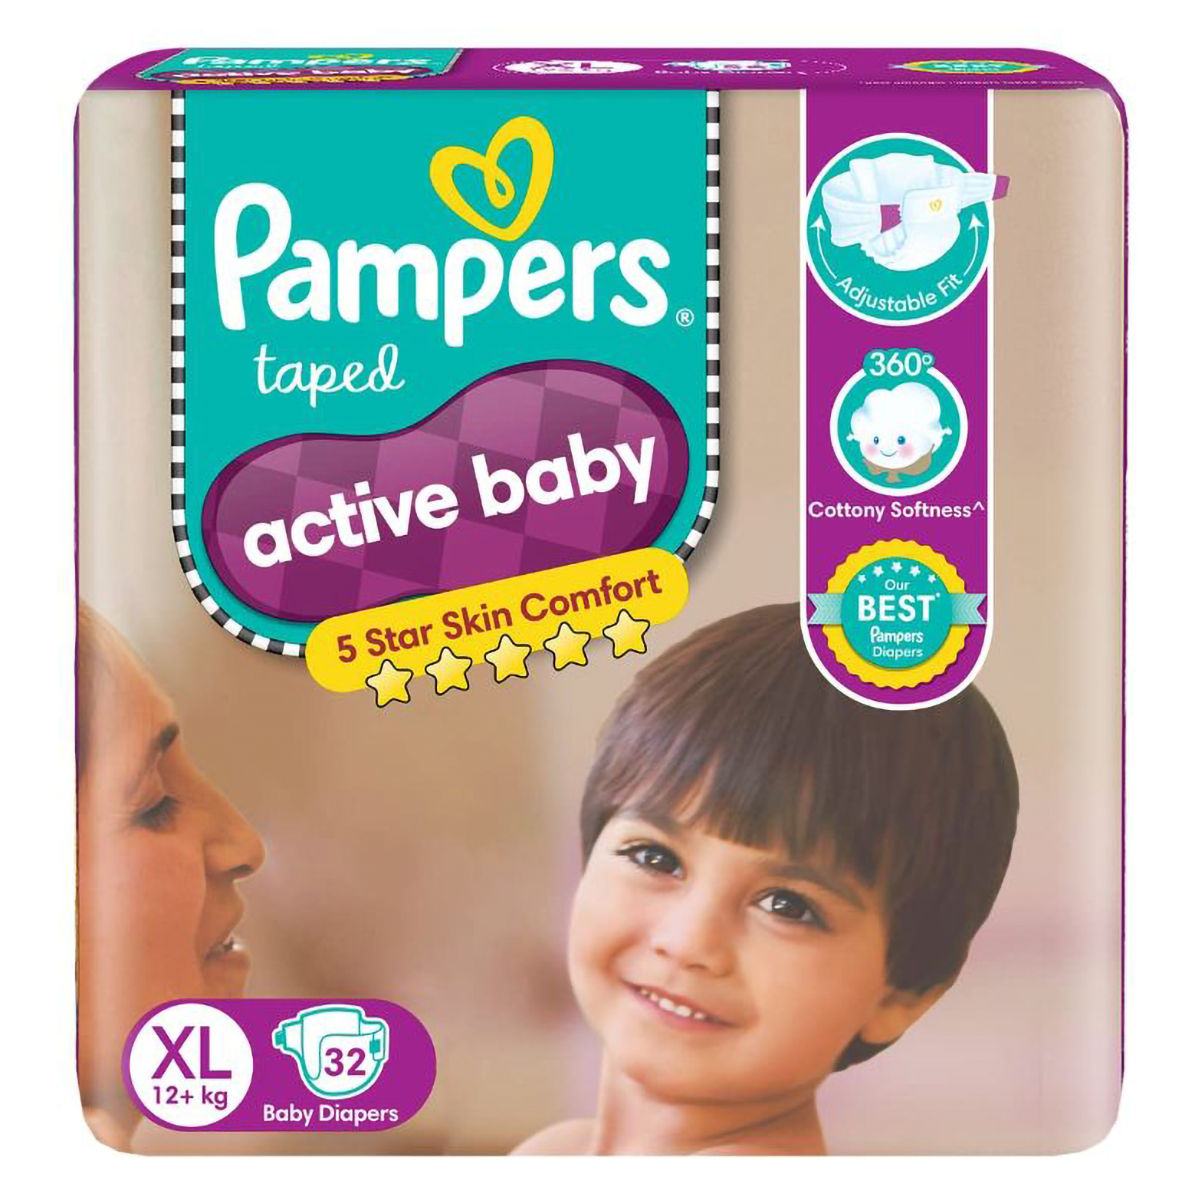 pampers active baby zl